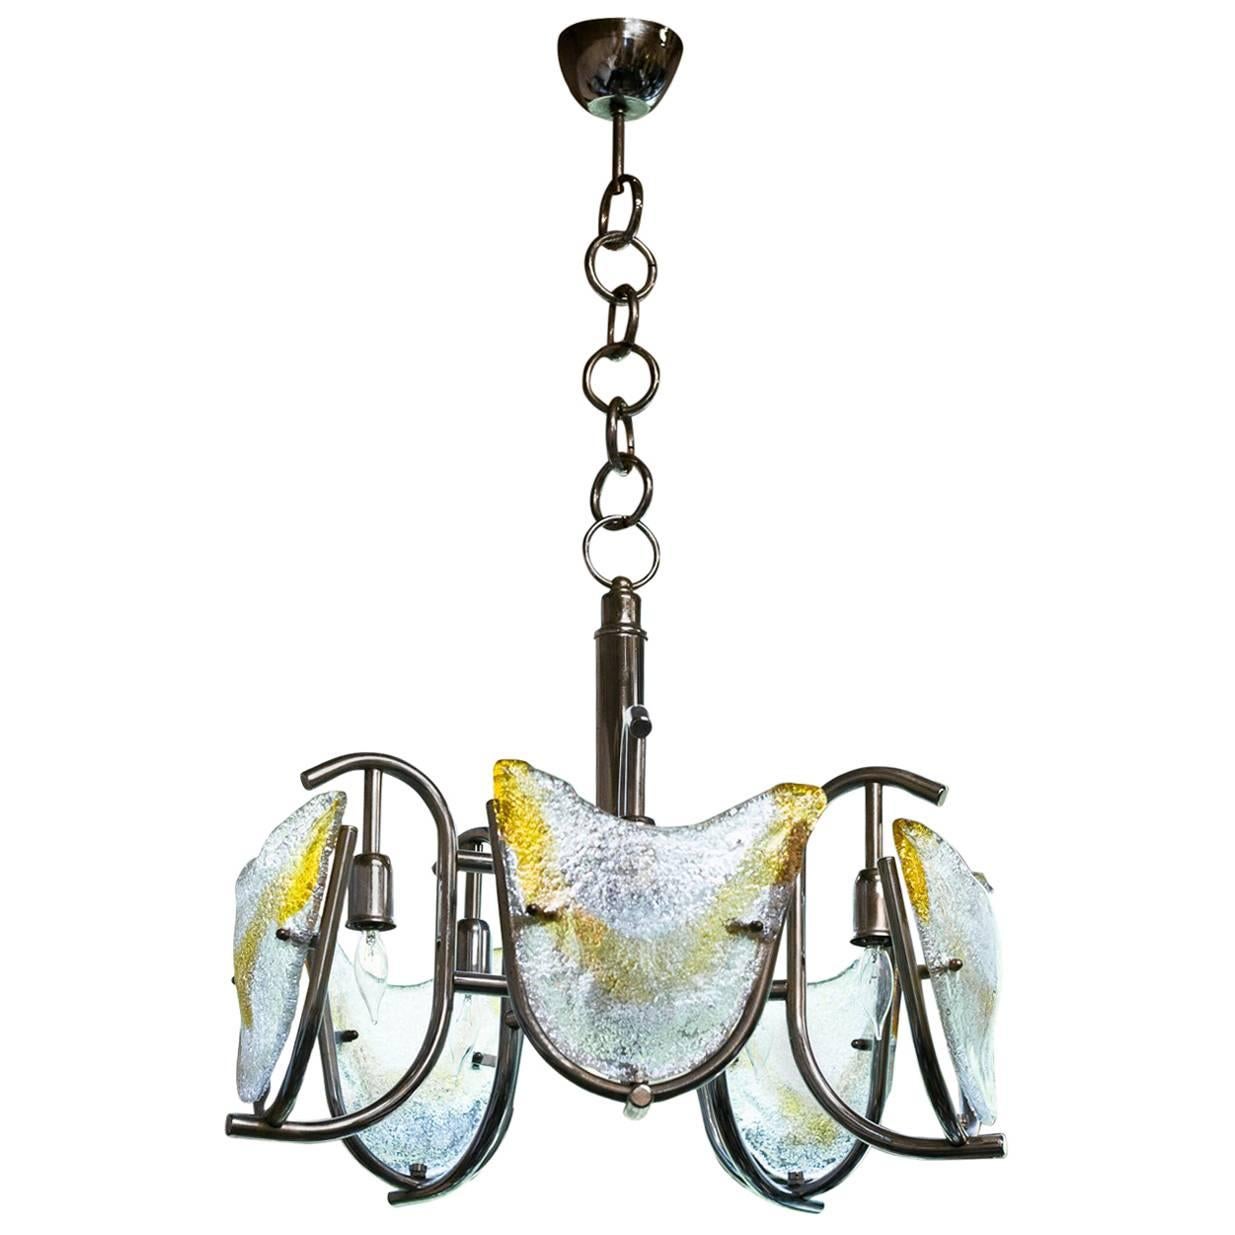 Italian Midcentury Mazzega/Murano Chandelier with Chrome Frame and Amber Glass For Sale